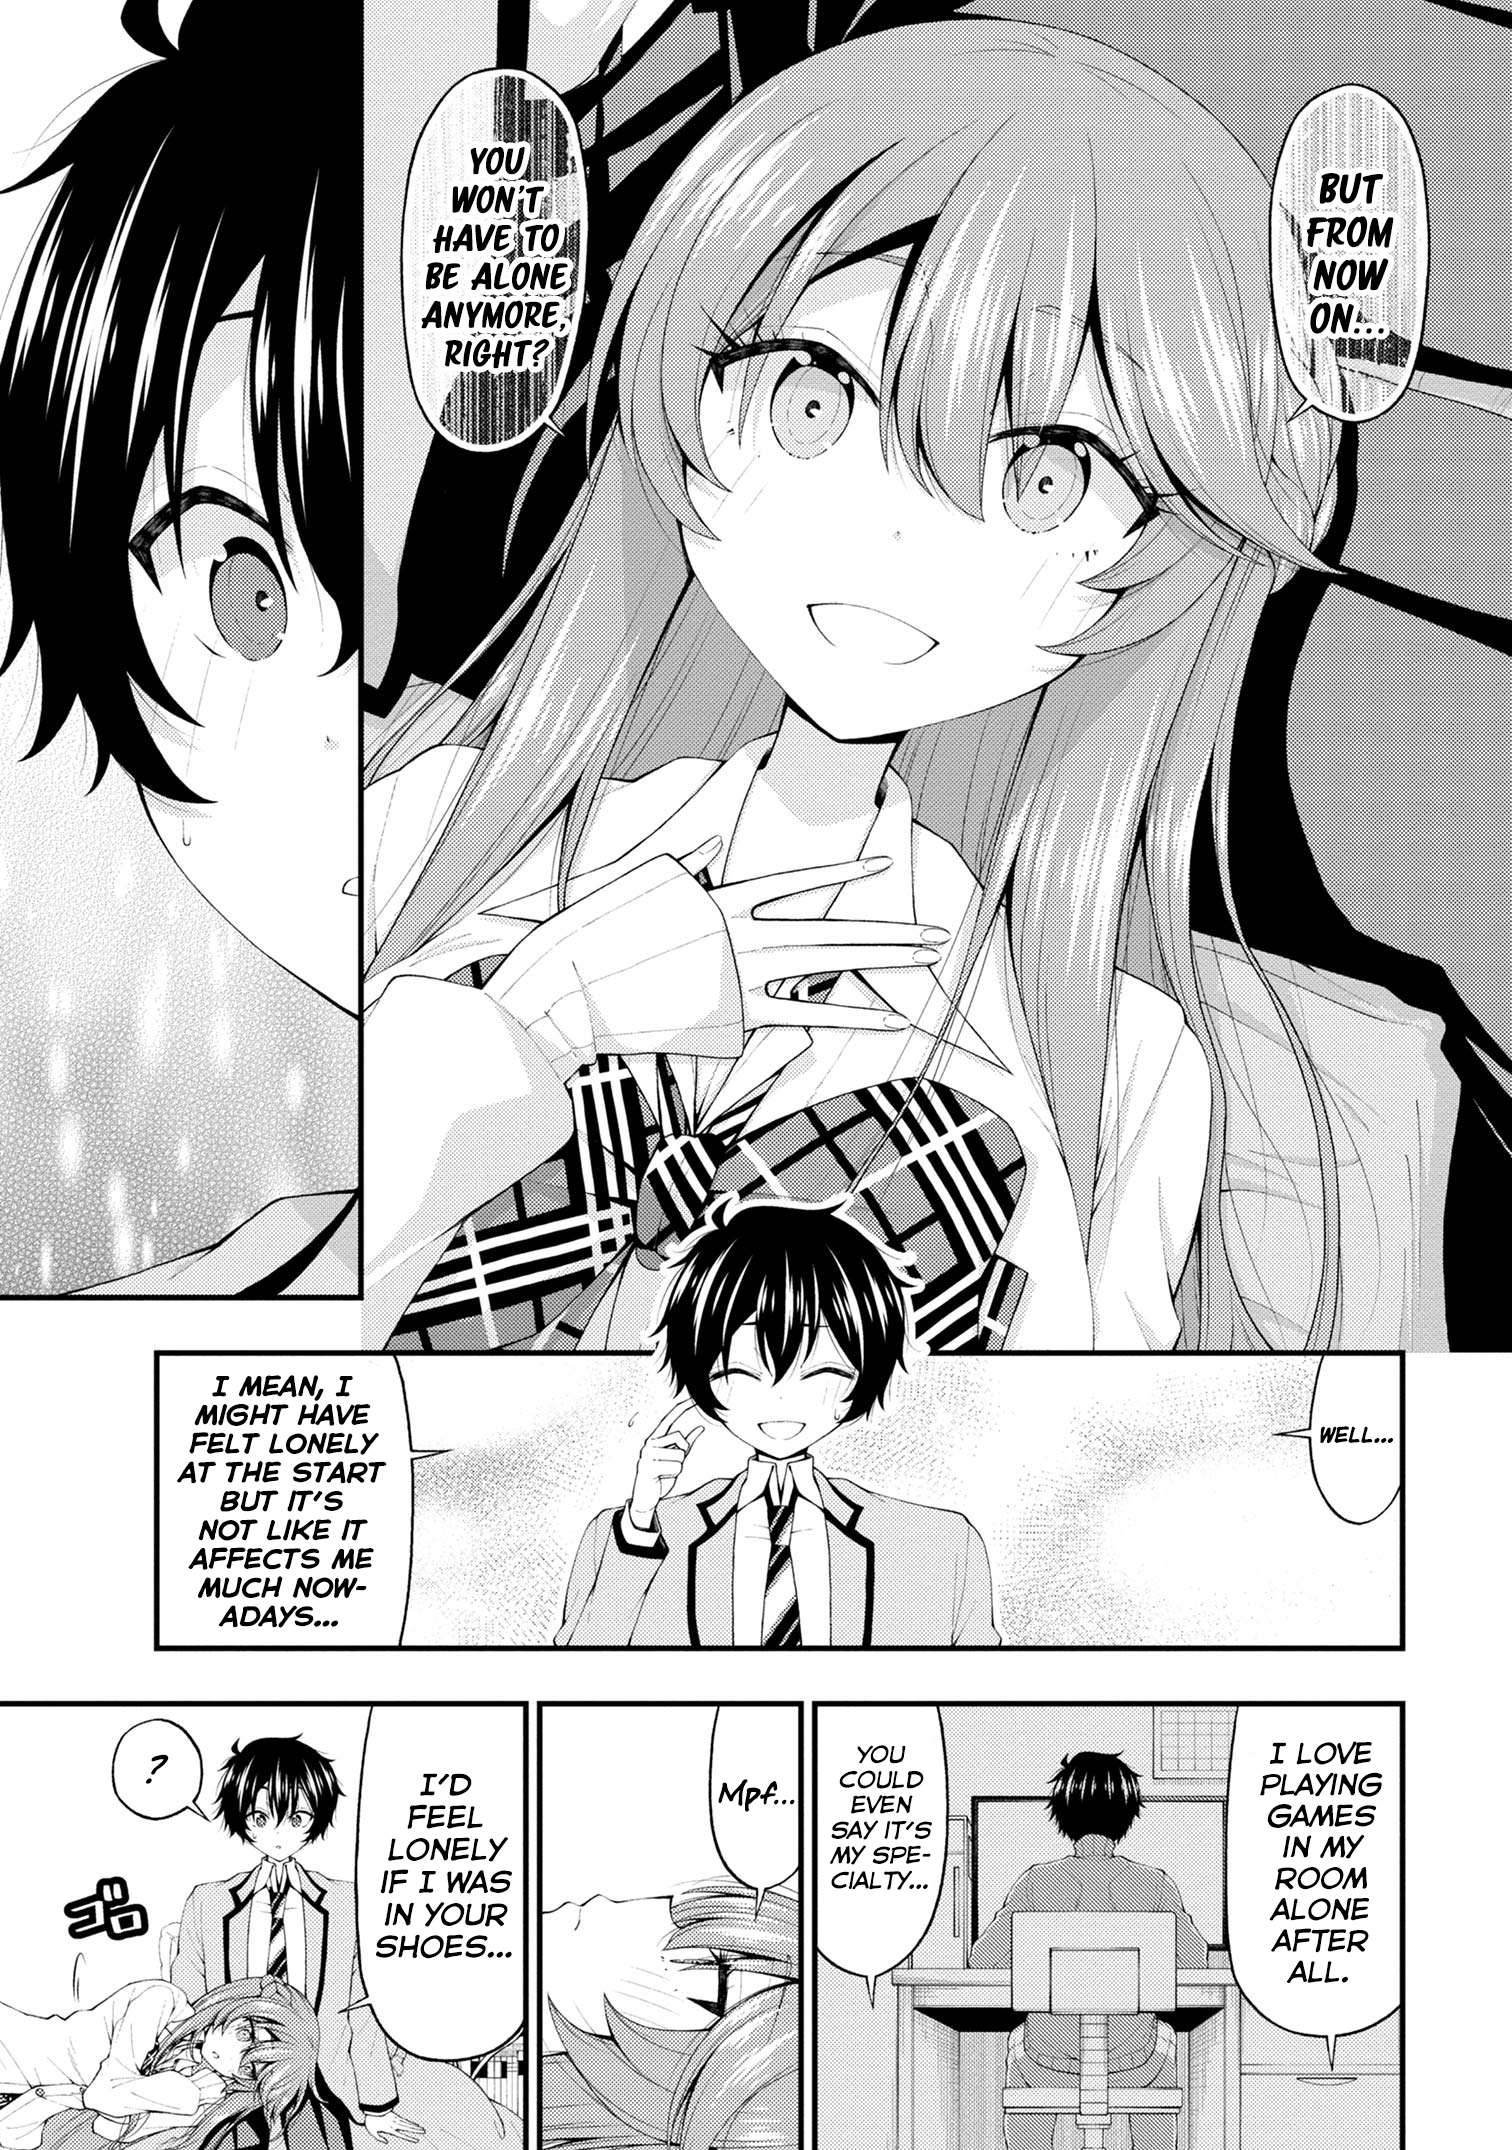 The Gal Who Was Meant to Confess to Me as a Game Punishment Has Apparently Fallen in Love with Me - chapter 17 - #6